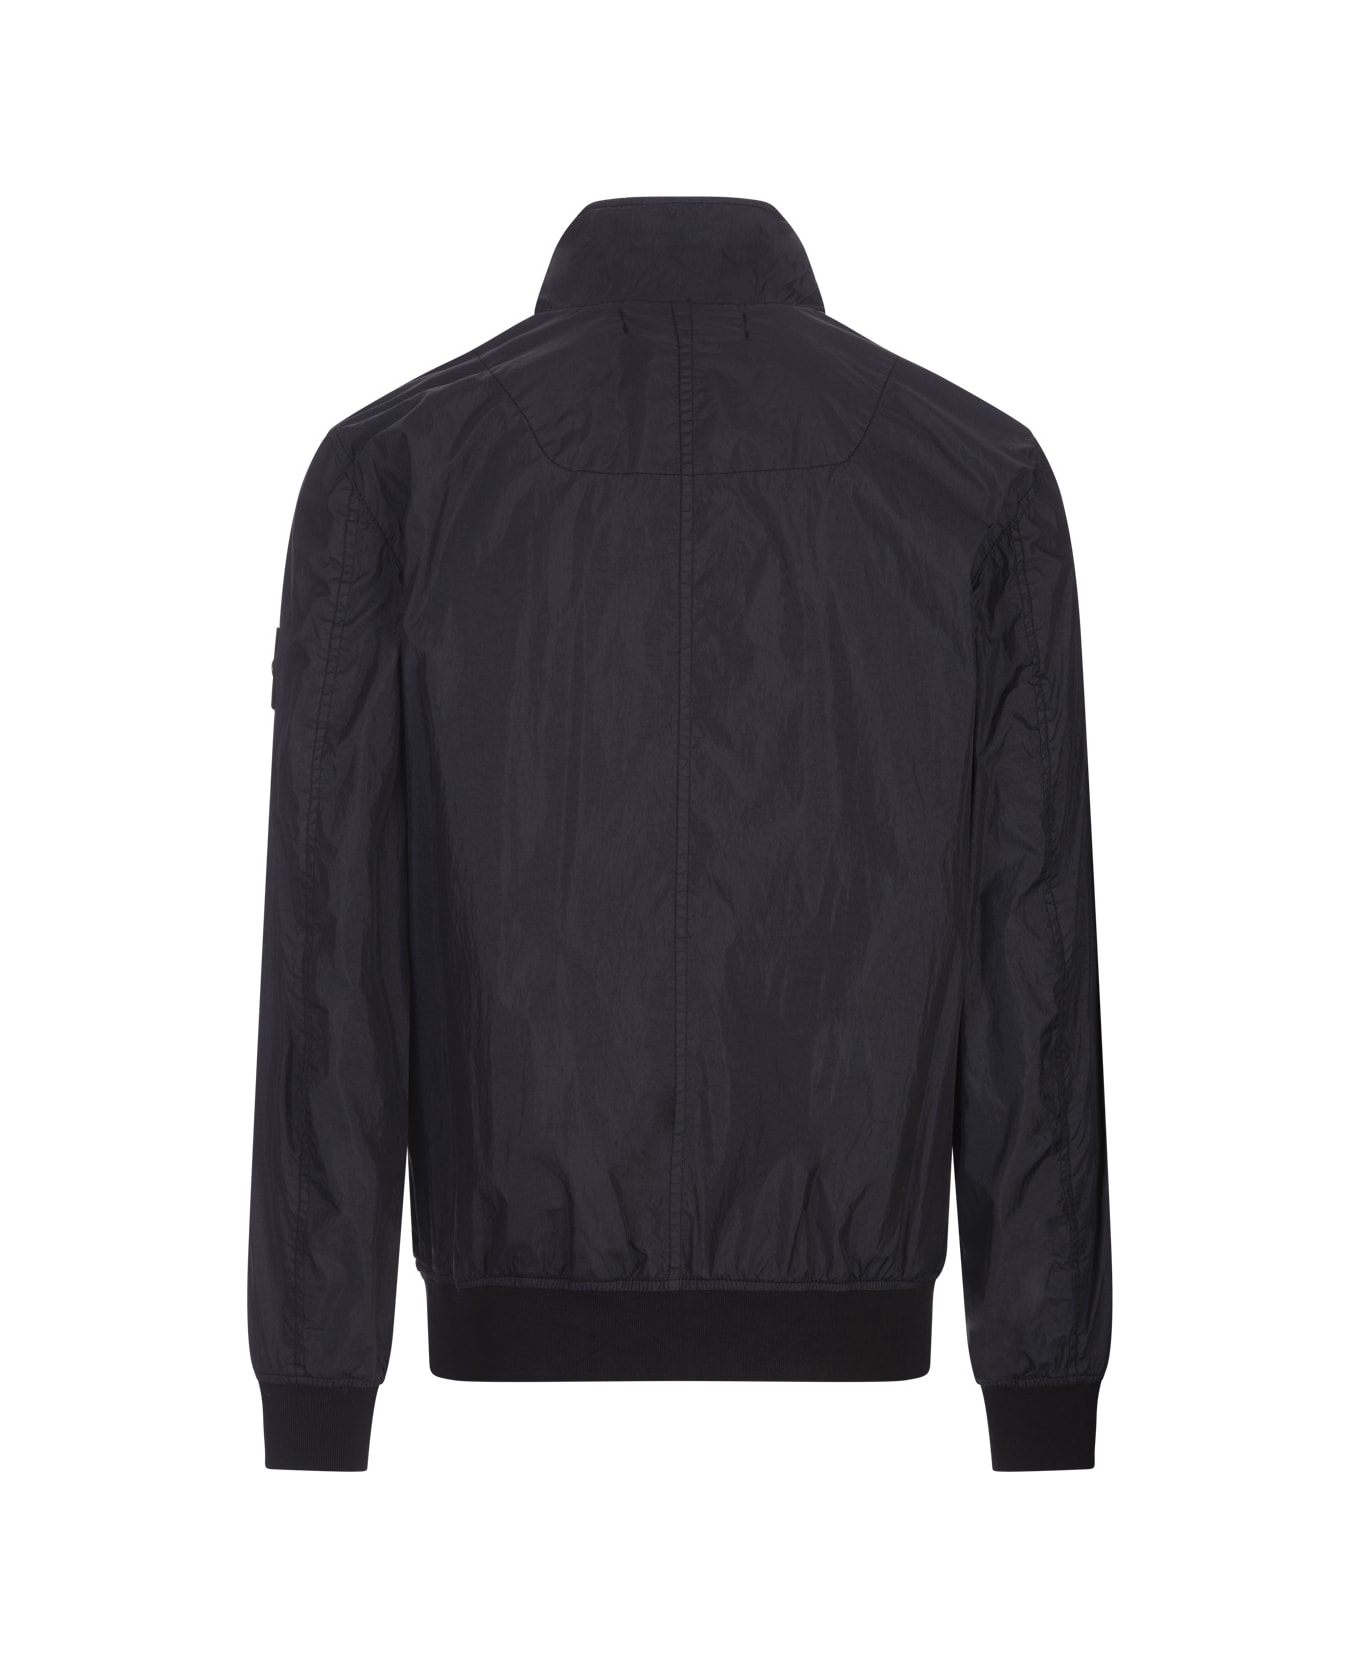 Stone Island Garment Dyed Crinkle Reps R-ny Jacket In Navy Blue - Blue